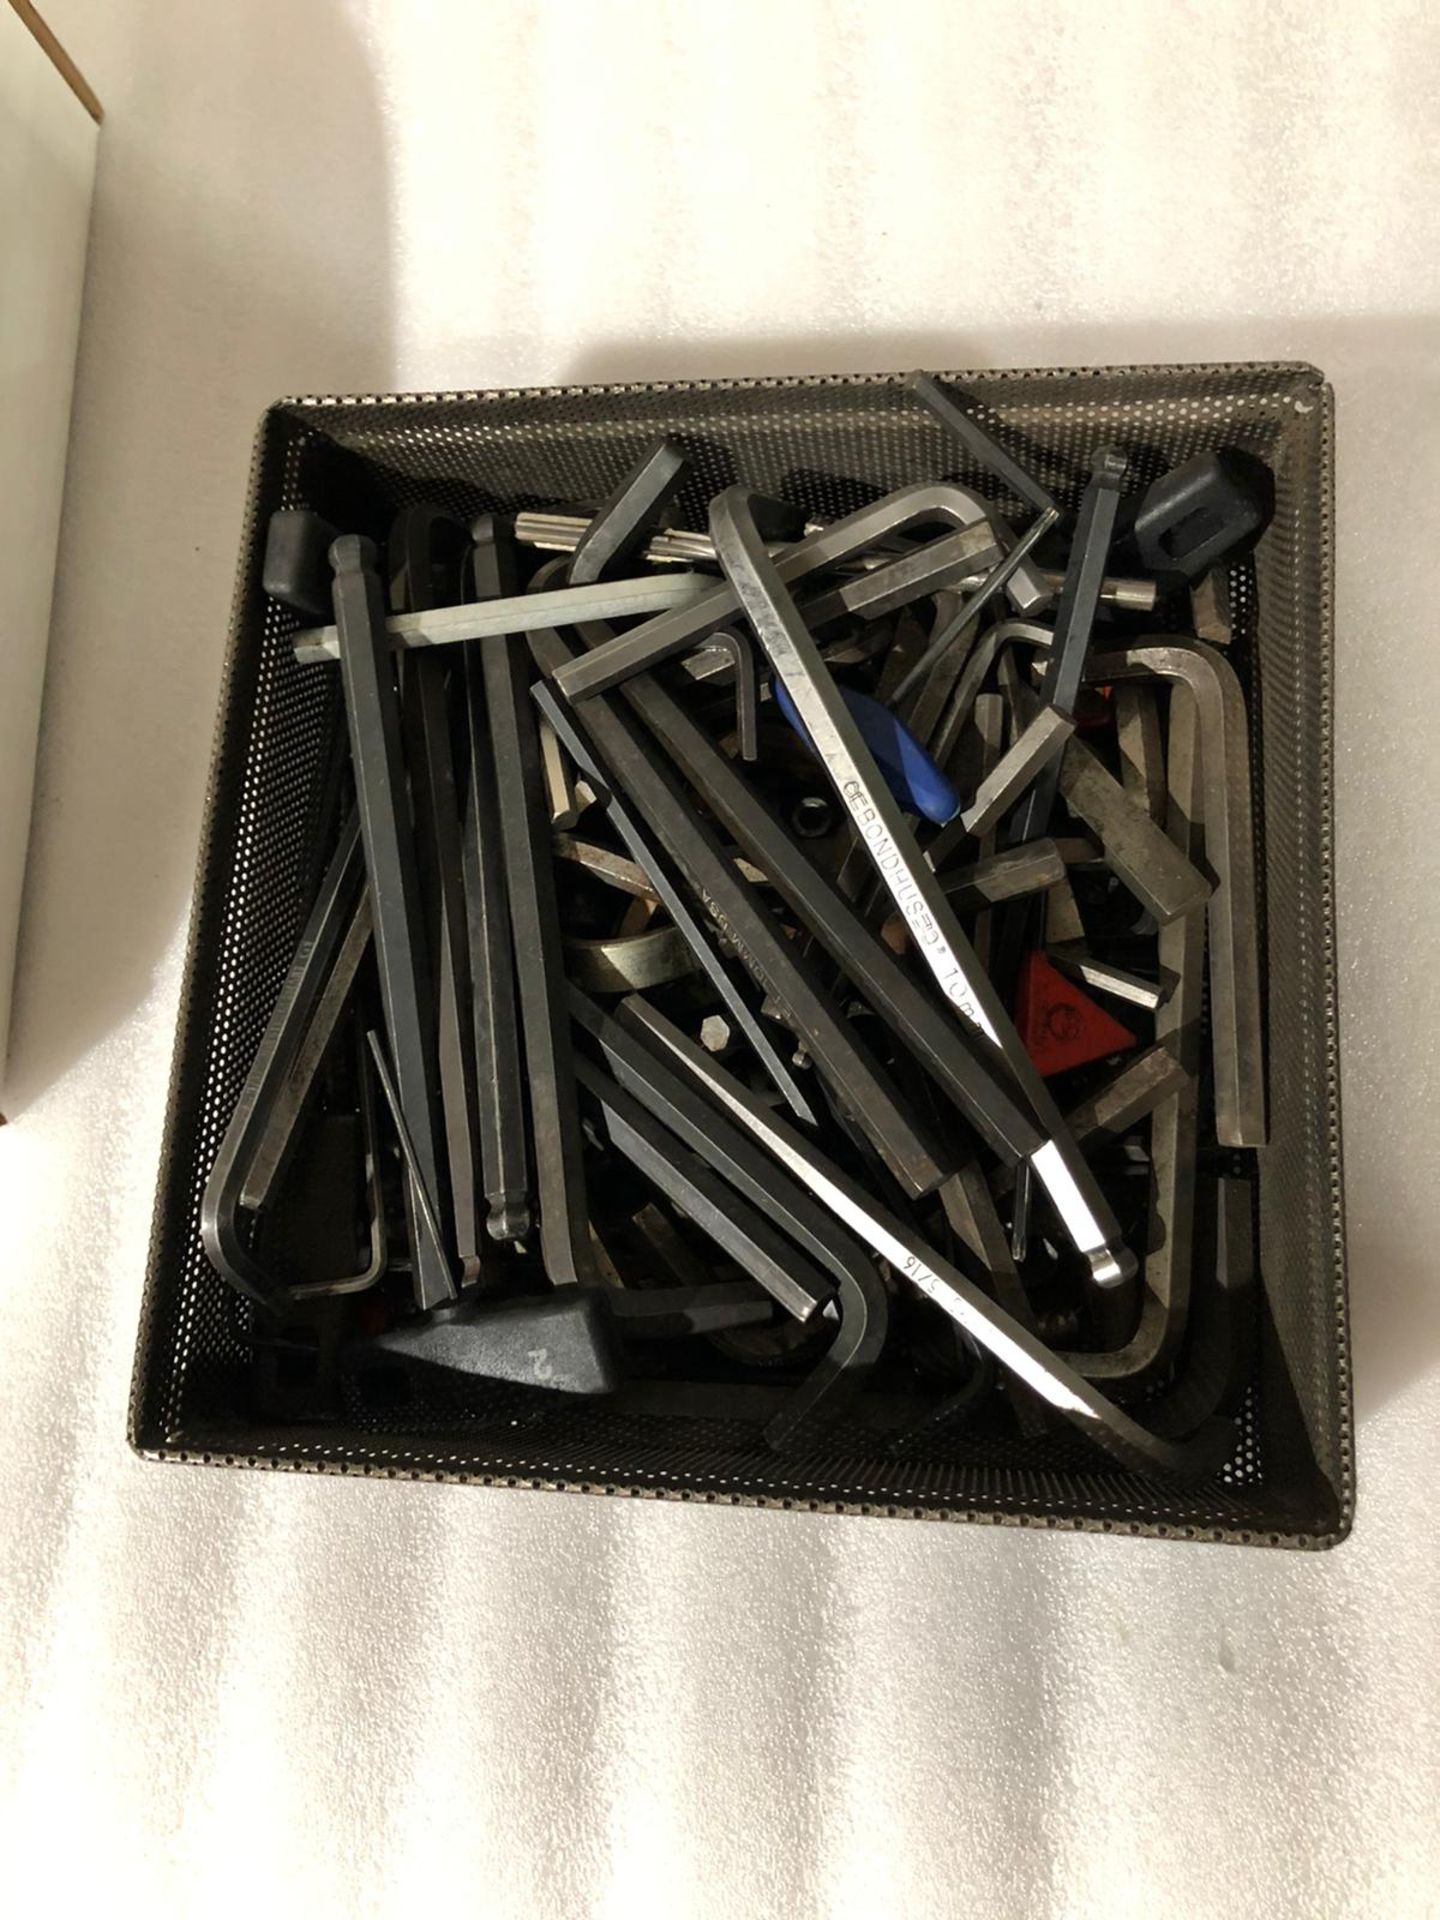 Lot of Allen Key Wrench Units